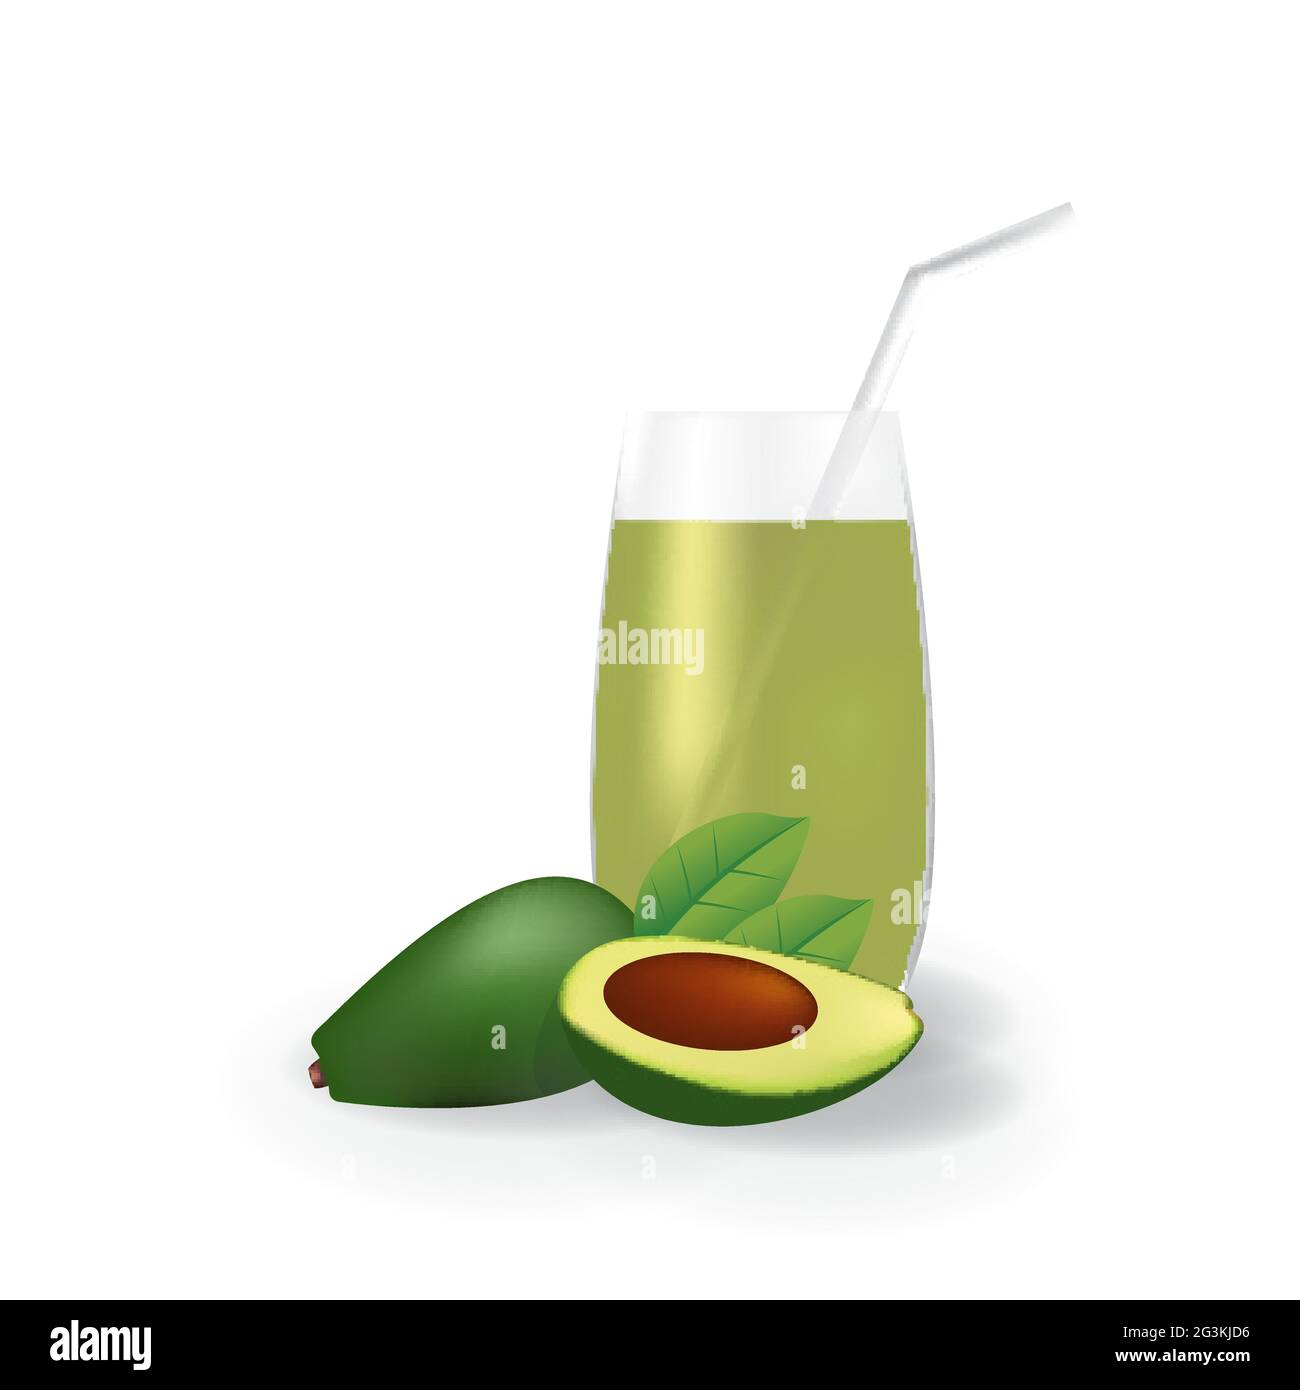 Realistic Avocado Fruit Juice in Glass Straw Healthy Organic Drink Illustration Stock Vector